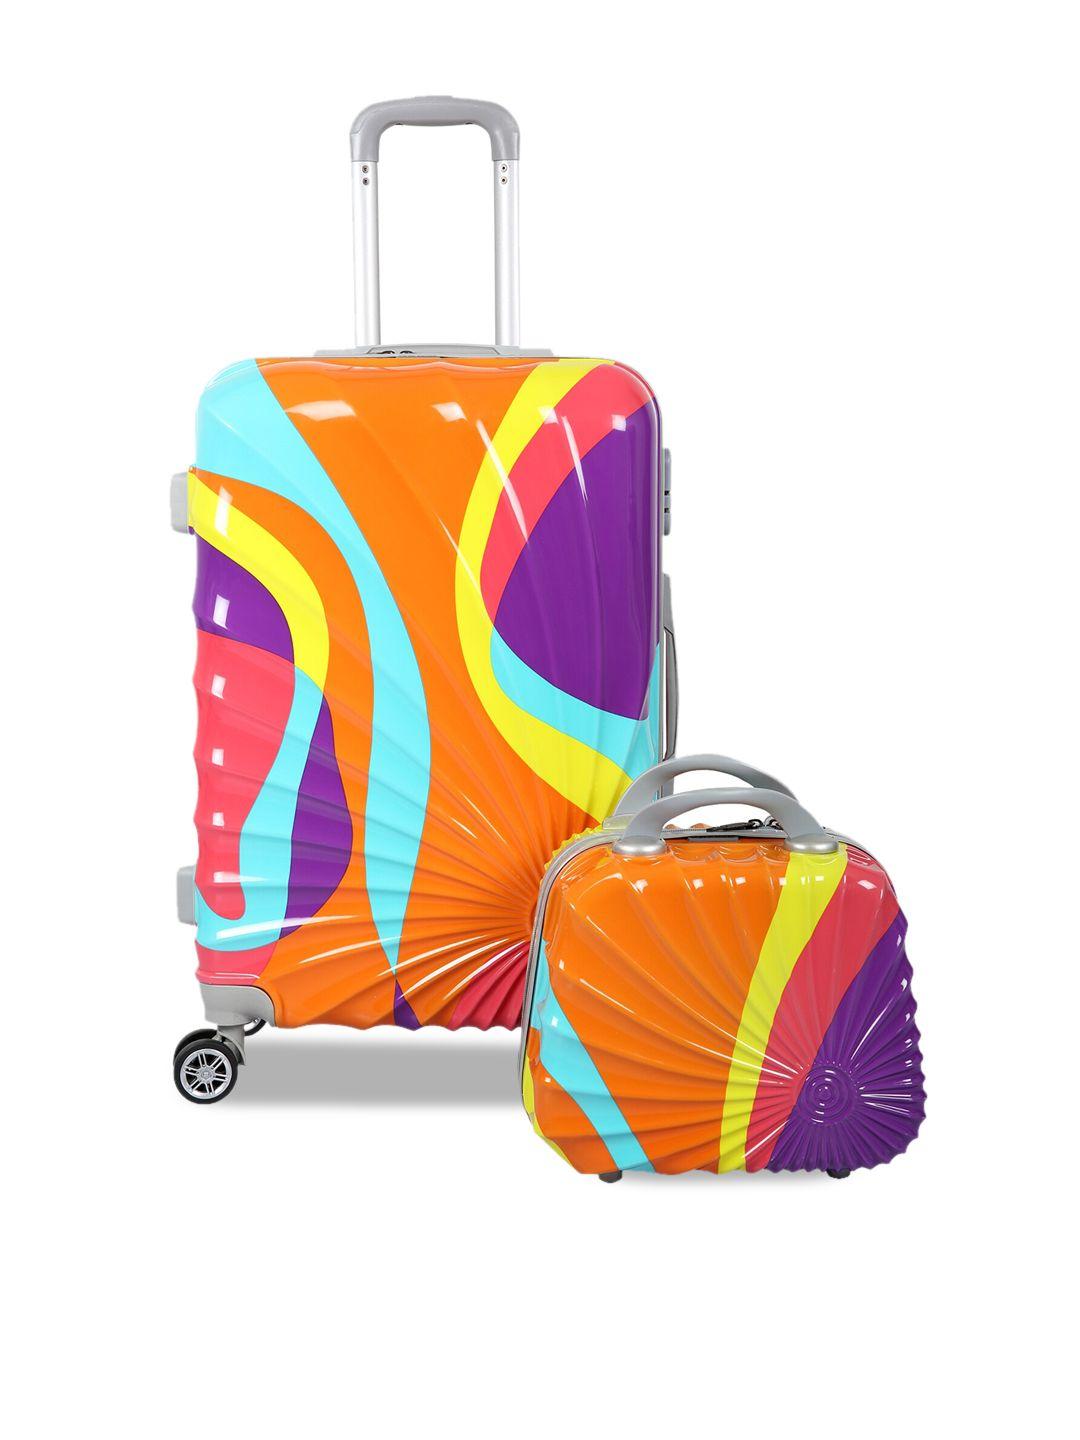 polo class unisex multicoloured printed travel luggage trolley bag with vanity bag